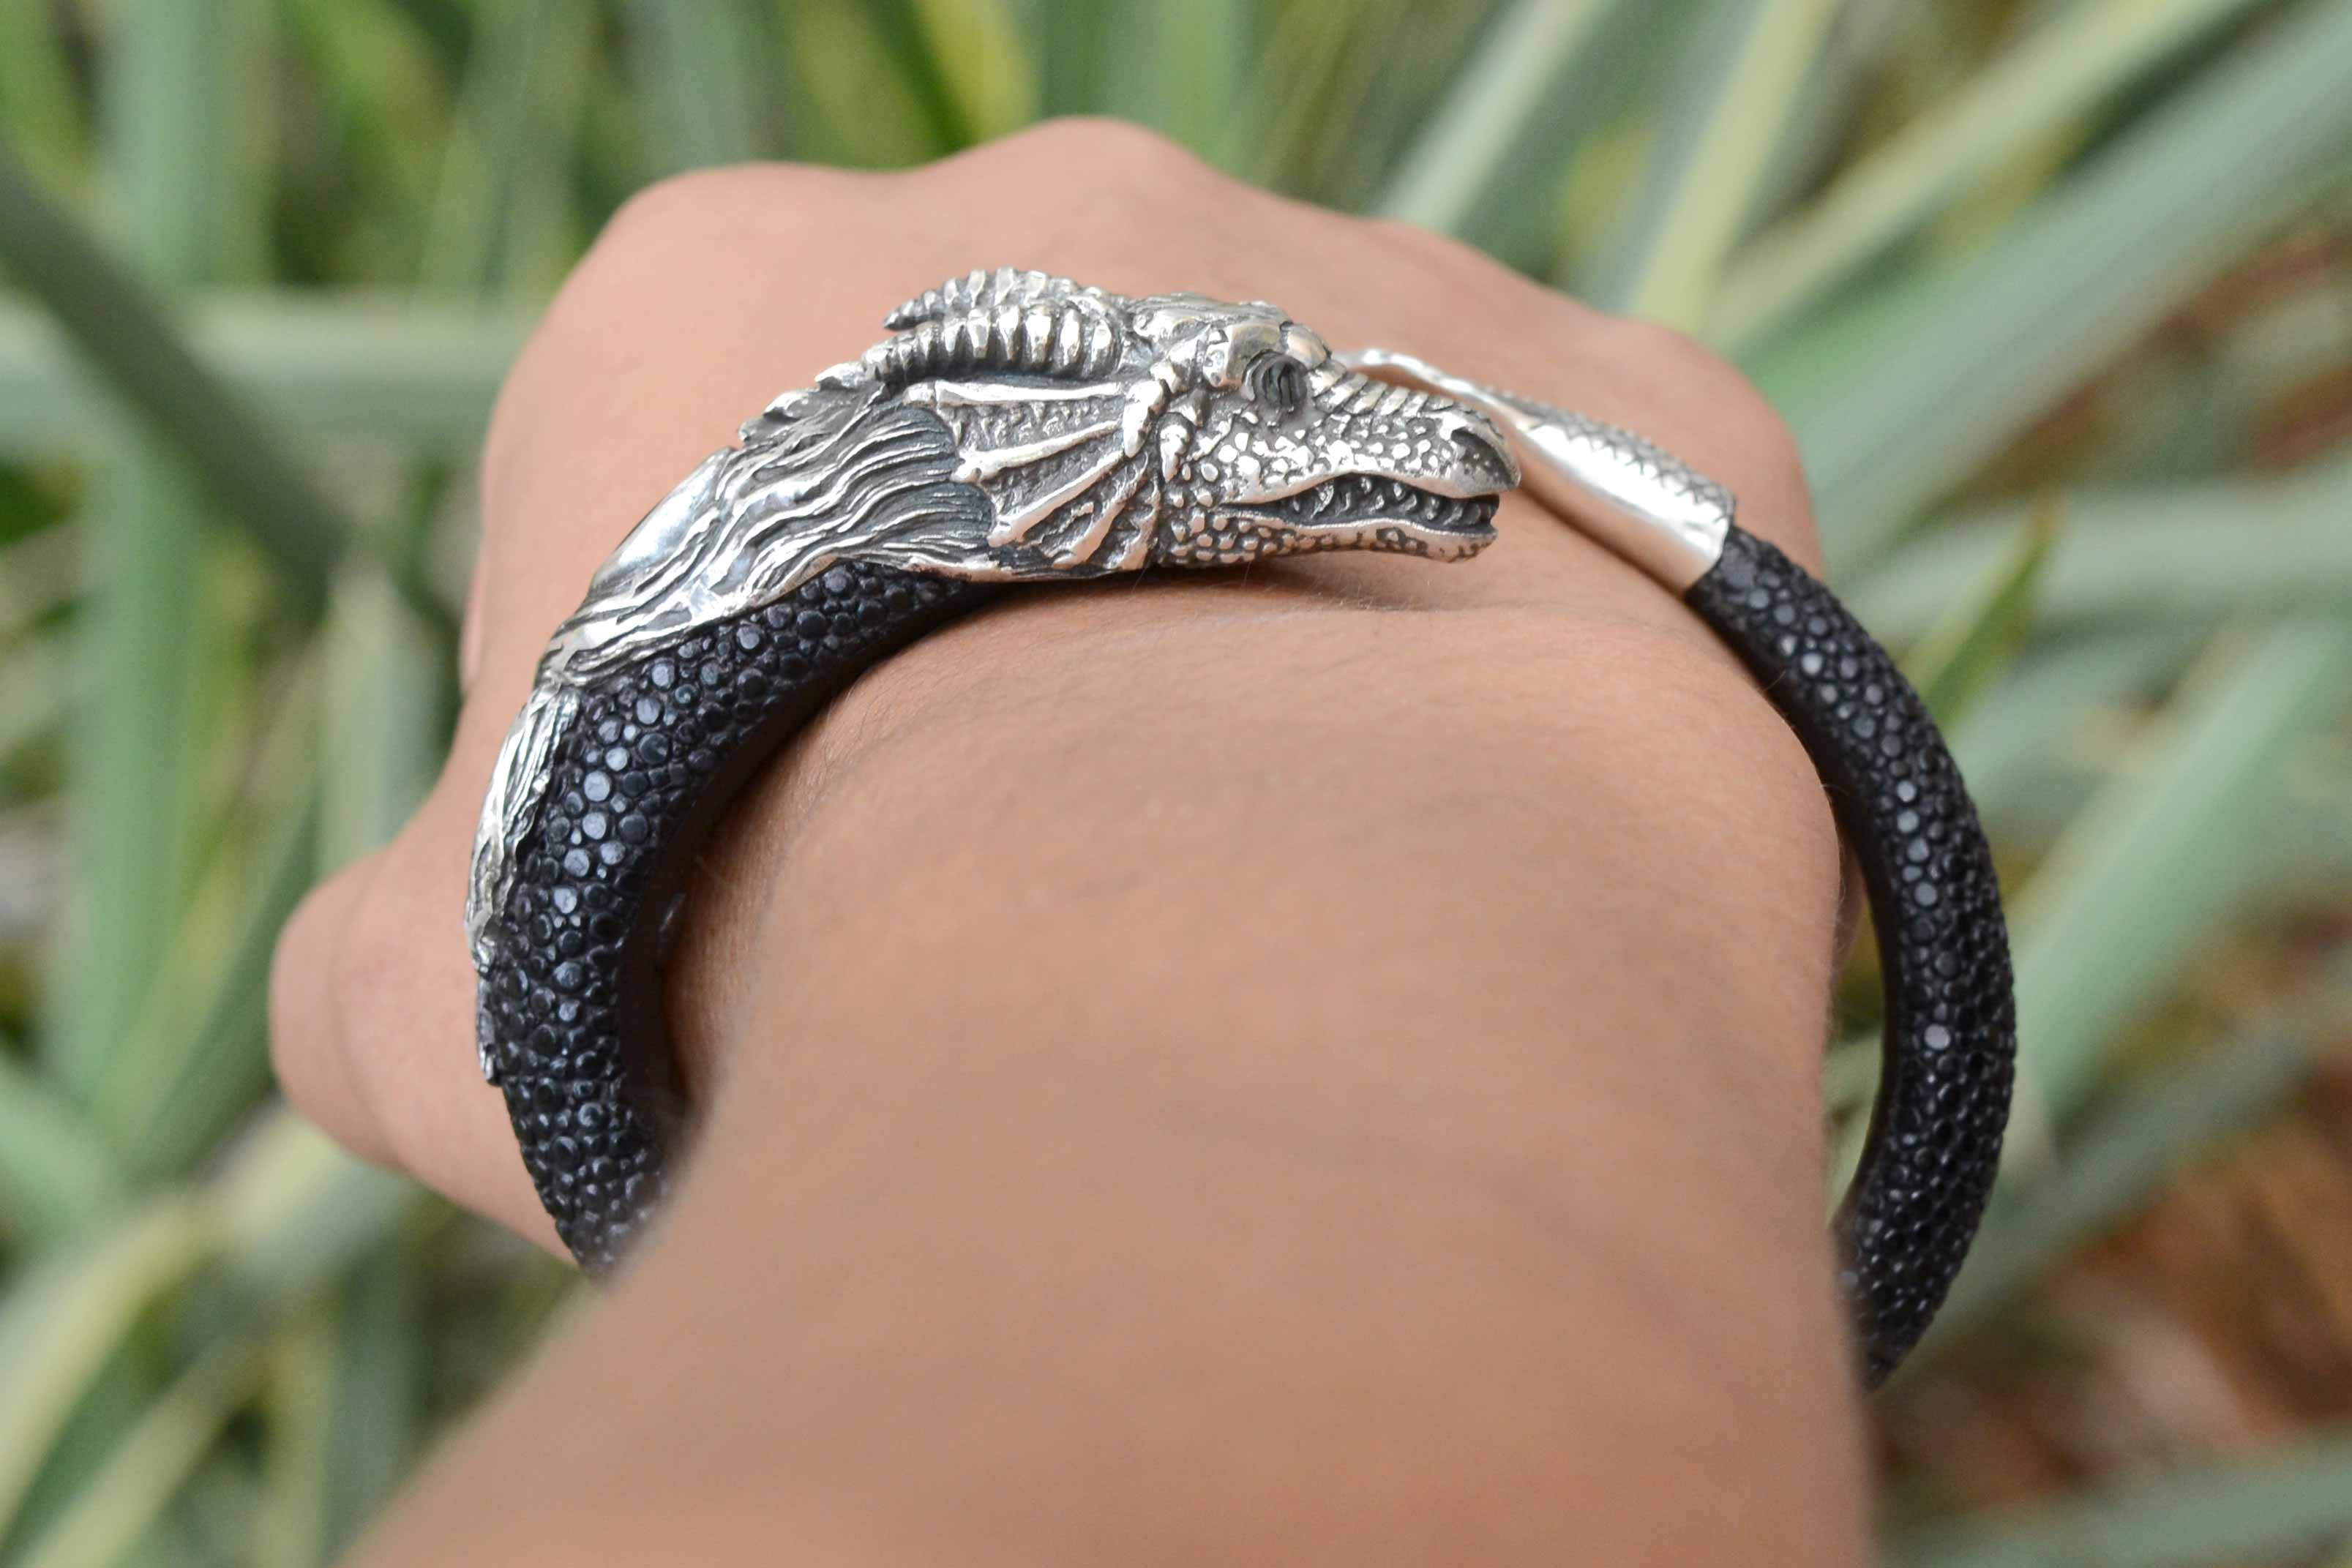 this leather cuff bangle has a silver dragon head and tail at the end of the wrap.